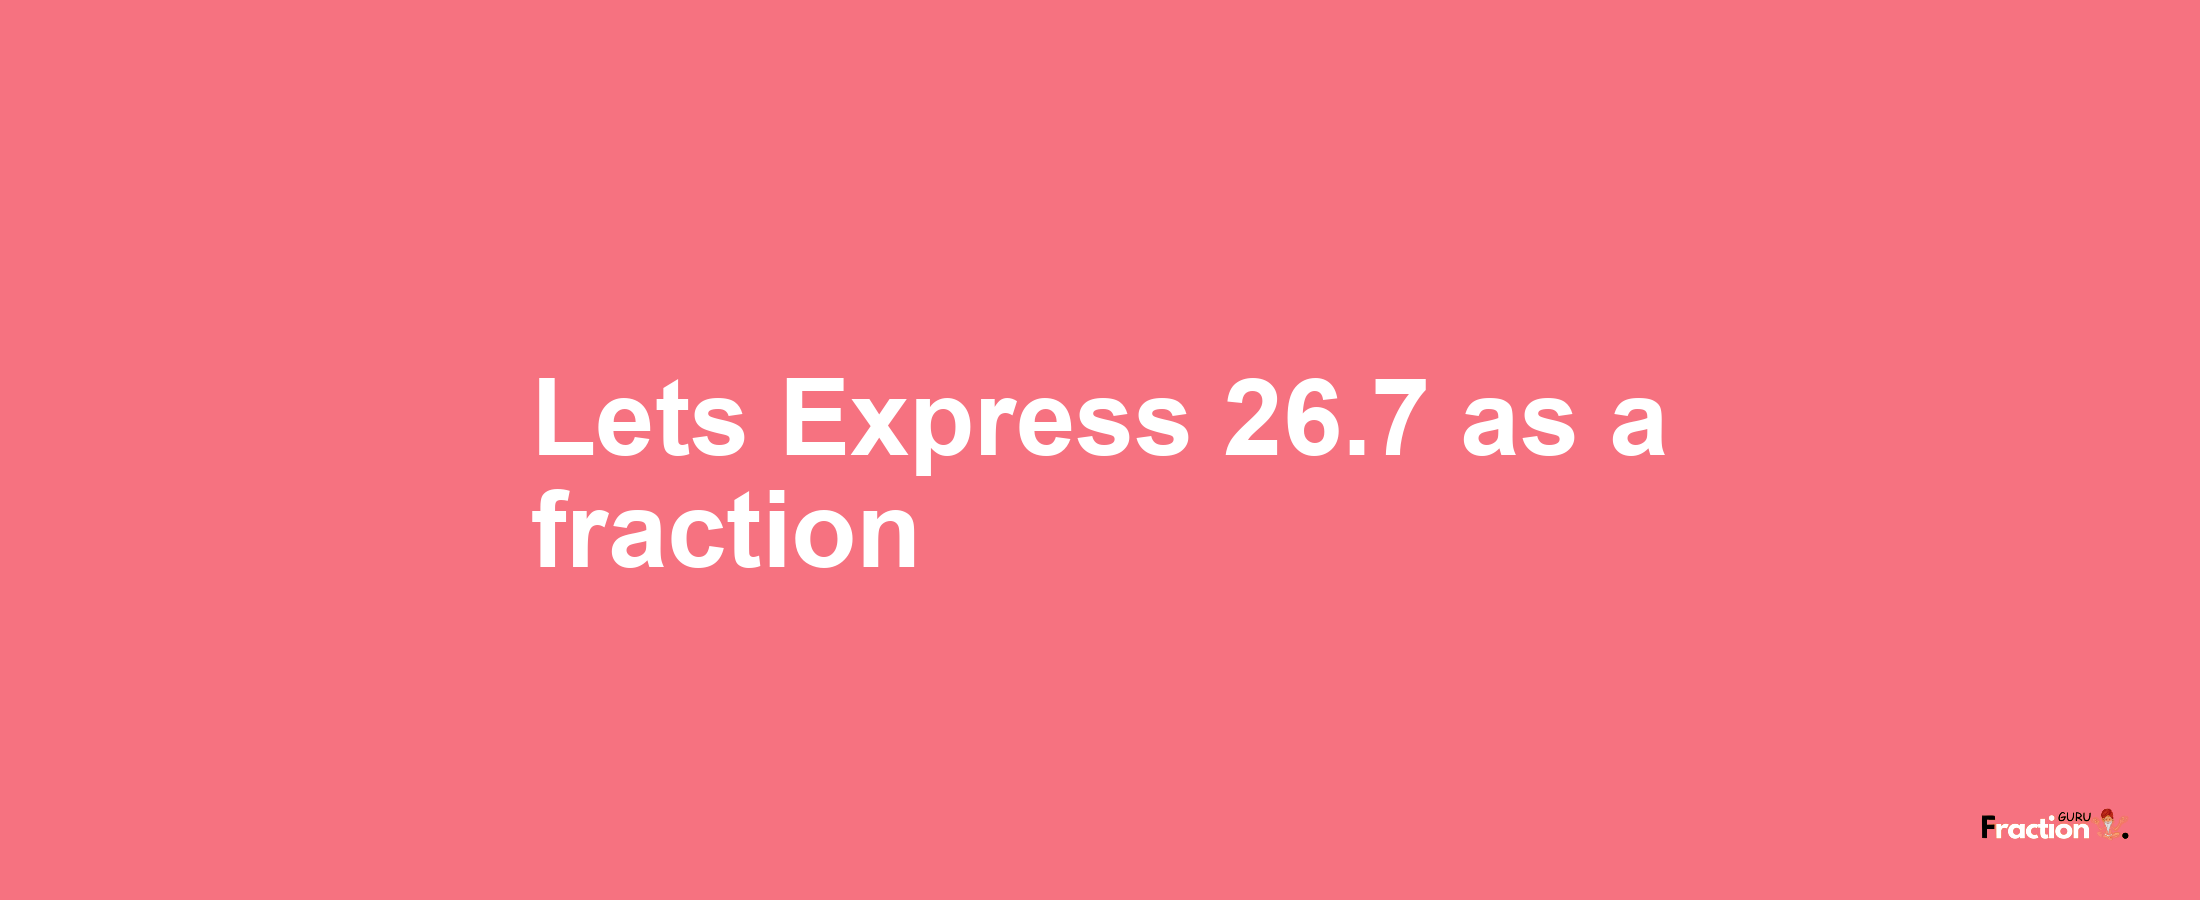 Lets Express 26.7 as afraction